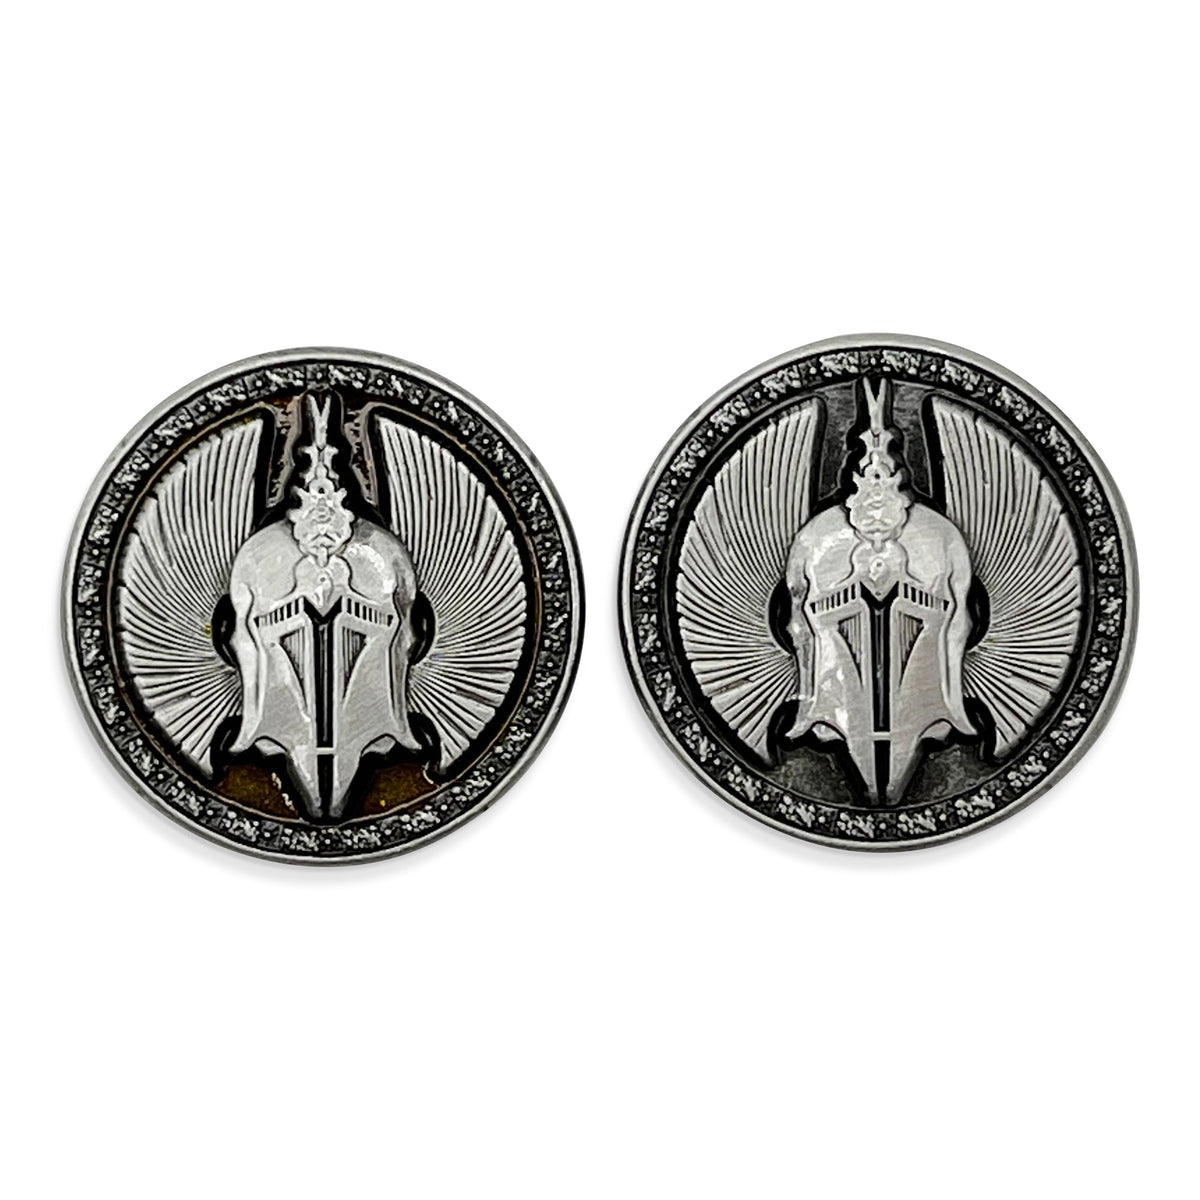 Profession Coins - Paladin Metal Coins Set of 10 - NOR 03413